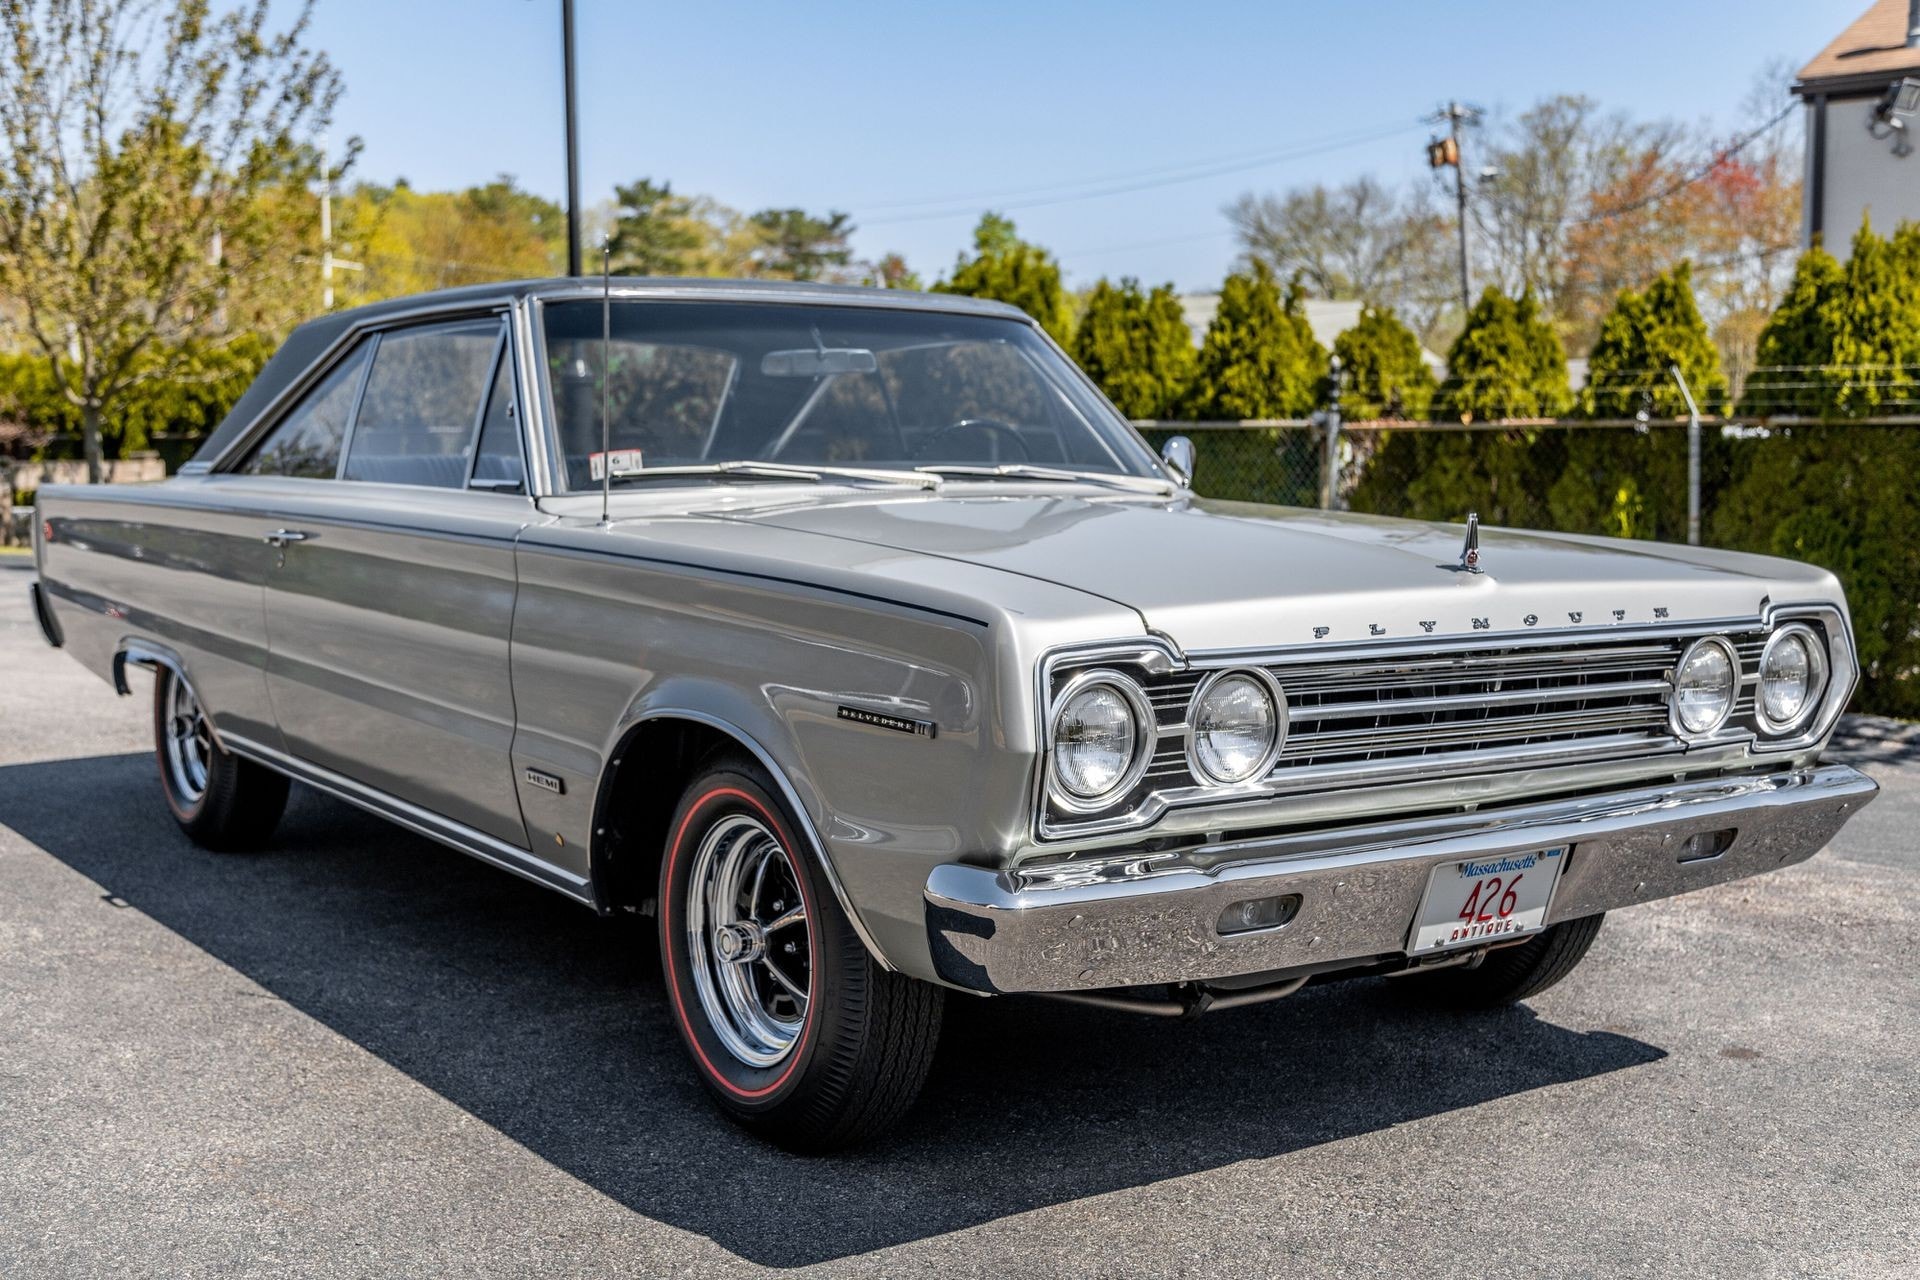 Rare Rides: The 1967 Plymouth Belvedere II R023